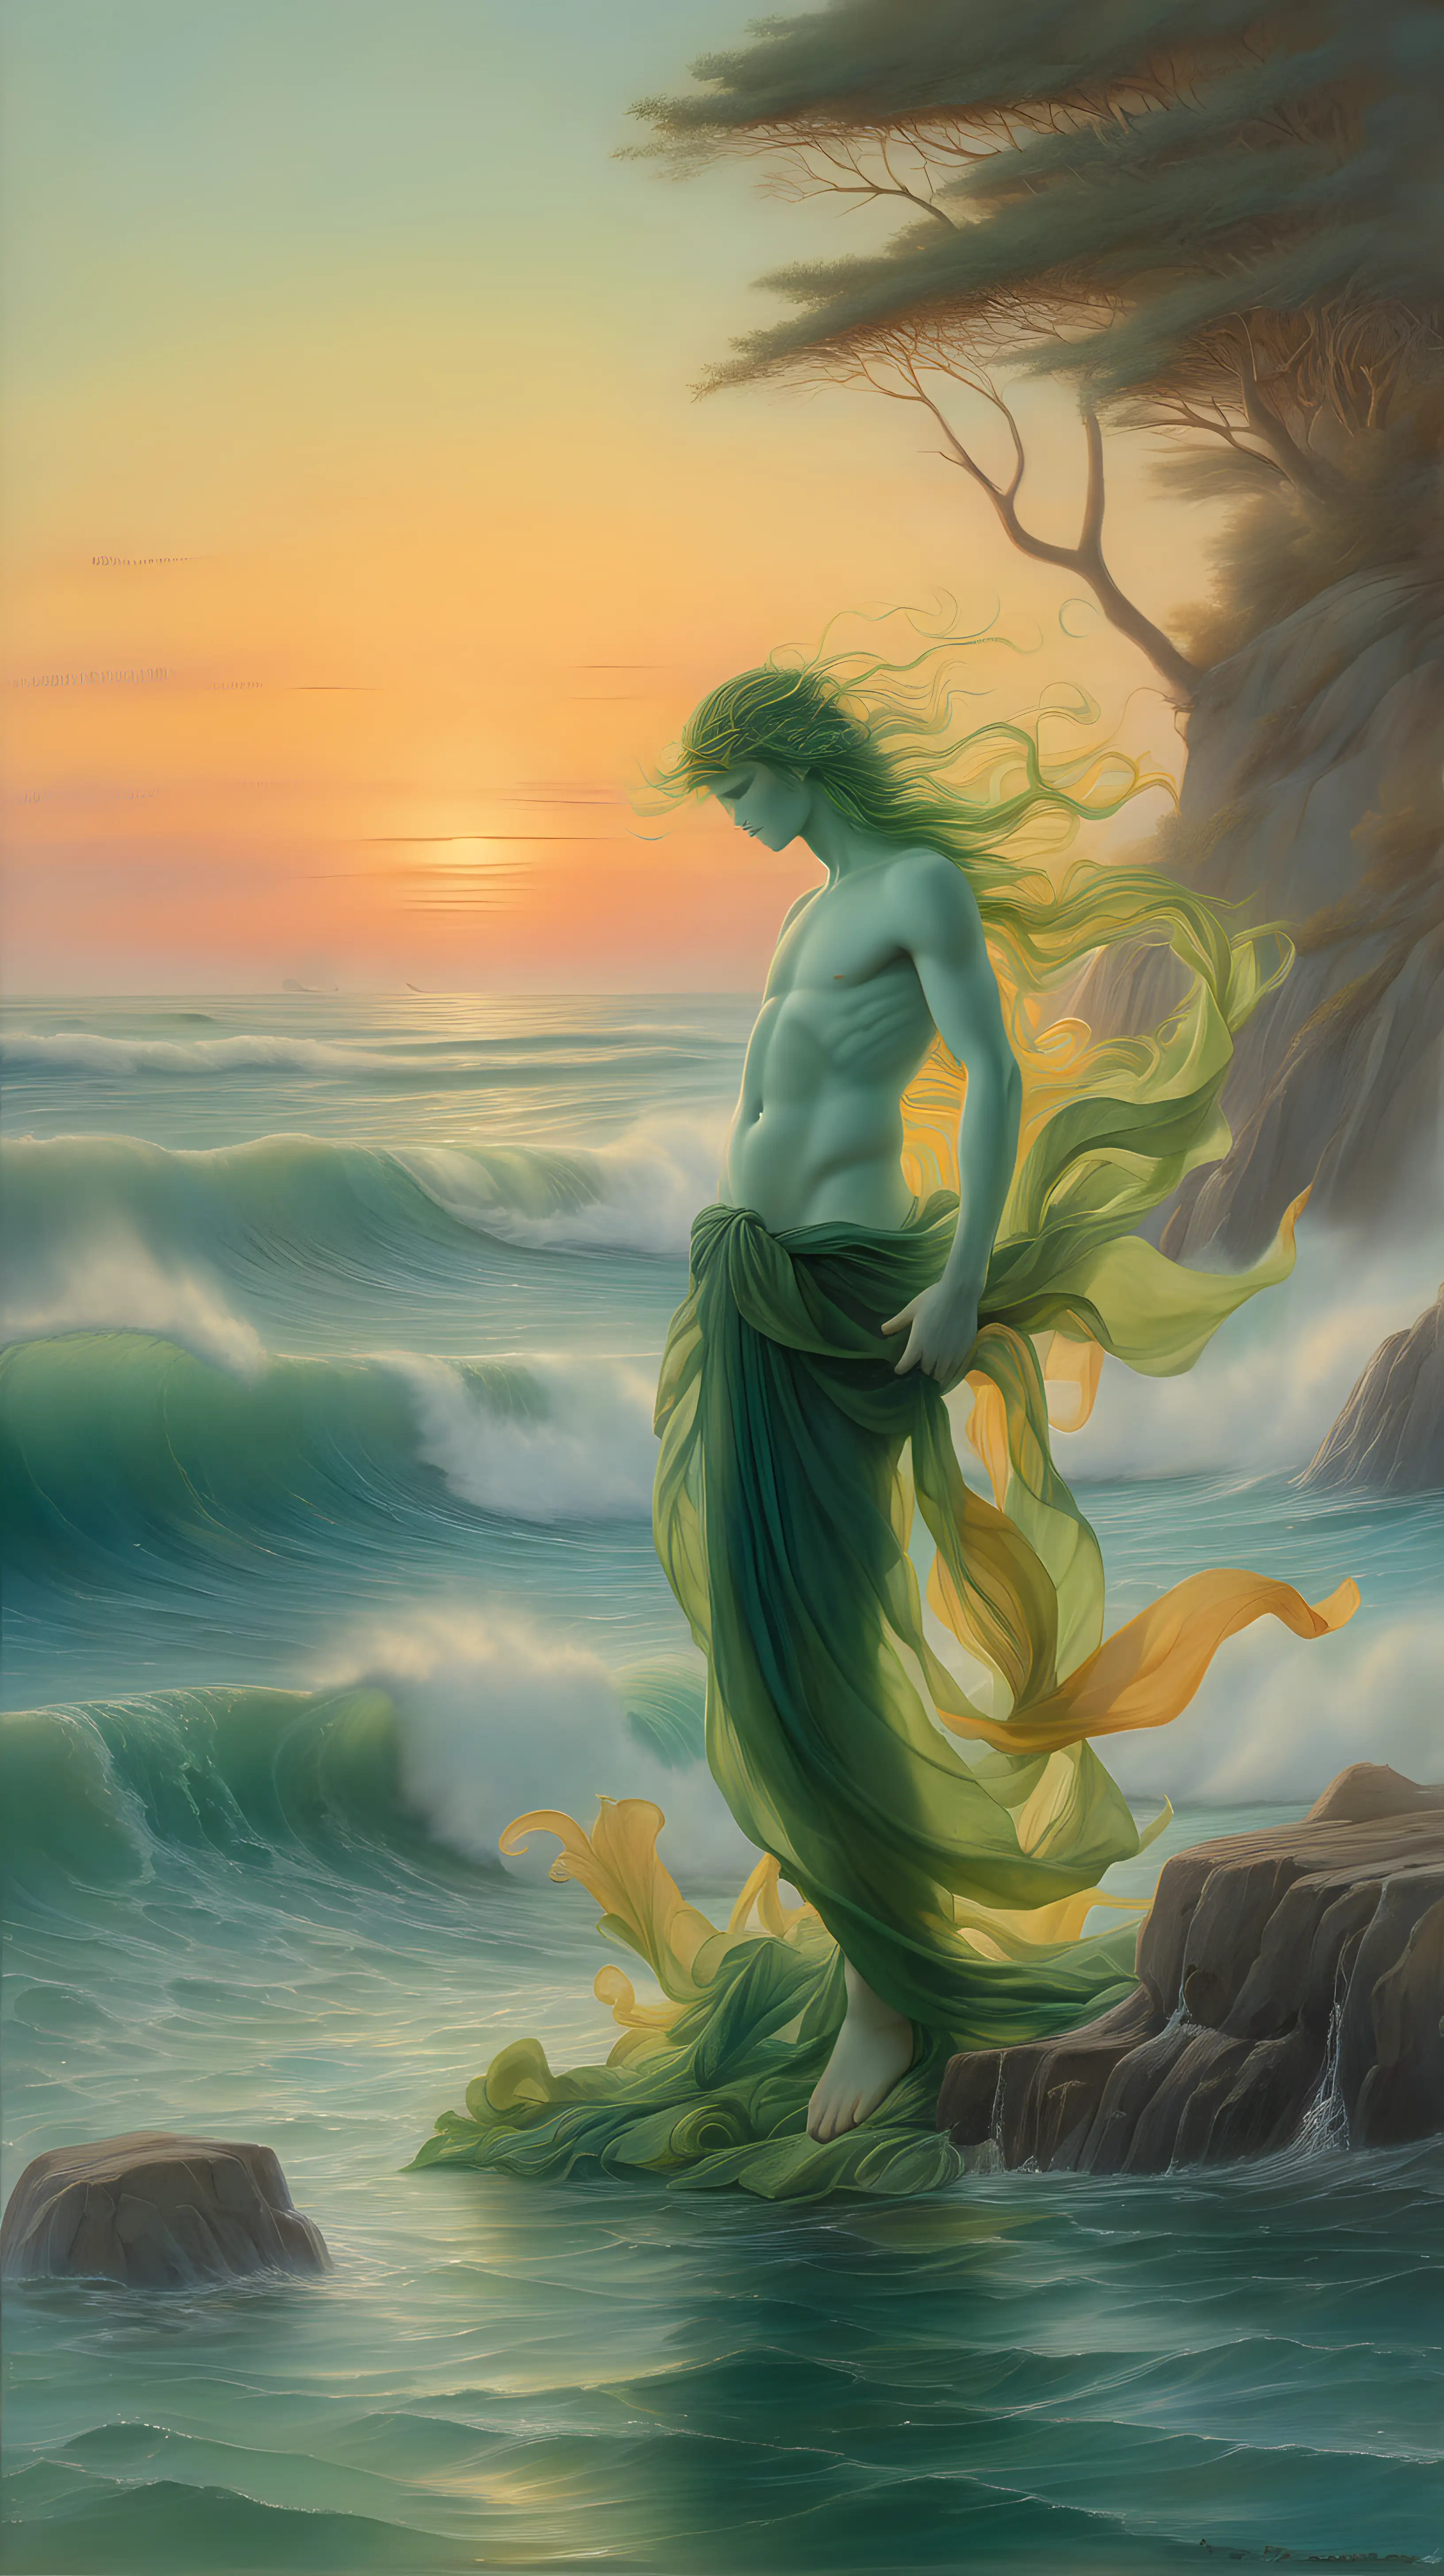 The image suggests an ethereal man male figure that could be interpreted as emerging from the sea. The character's flowing, leaf-like garments and the colors employed—shades of green, yellow, and orange—impart a sense of being part of a natural, aquatic environment. The background, with its soft hues, could be seen as a reflection of the sea at dawn or dusk, contributing to the serene and mystical quality of the image. The art style combines elements of realism, fantasy, and impressionism, creating a dreamlike vision of a sea nymph or oceanic entity.